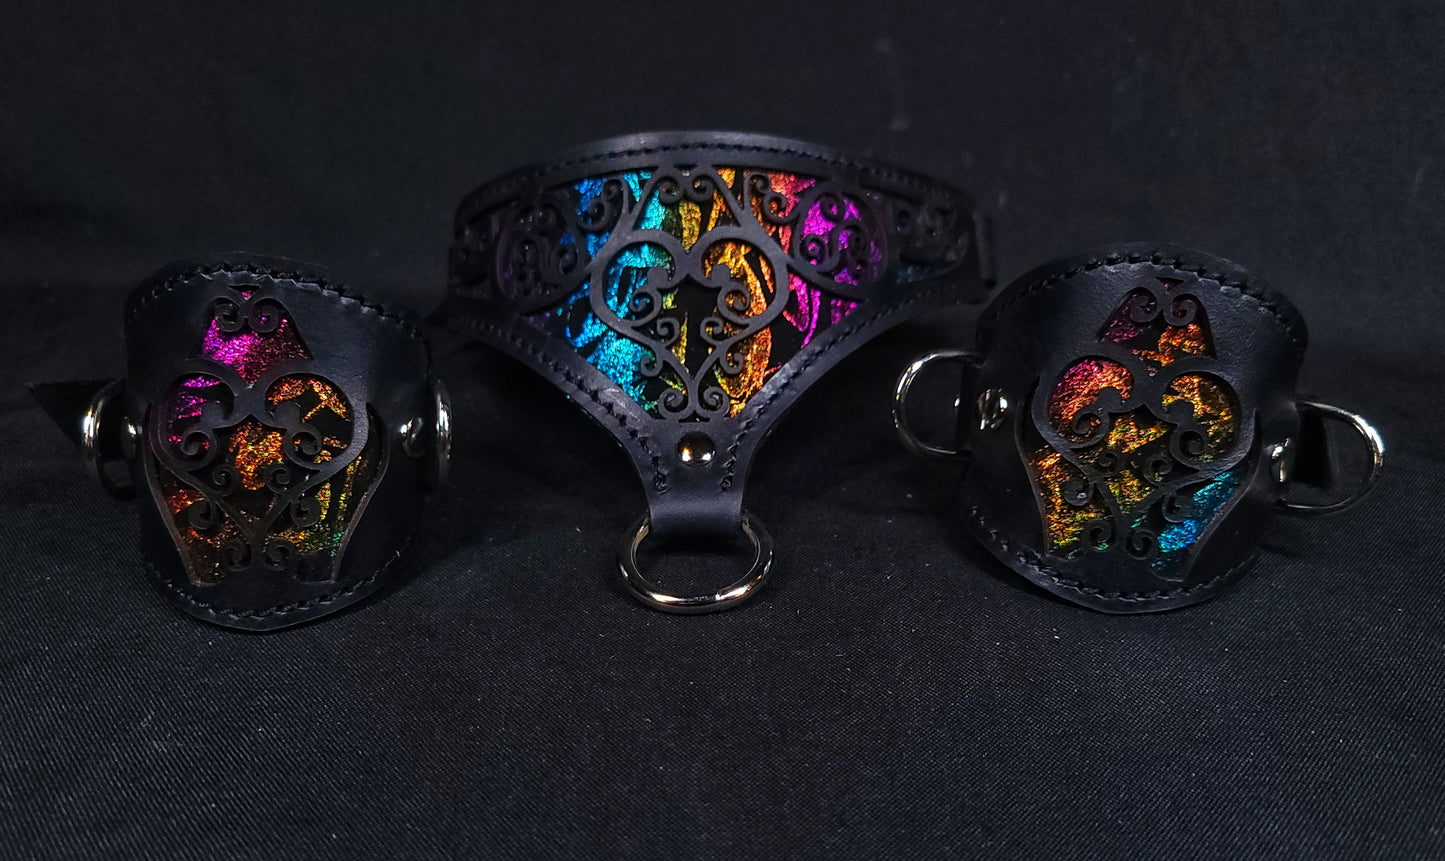 Rainbow Heart Filigree Collar and Cuffs - Made to Order